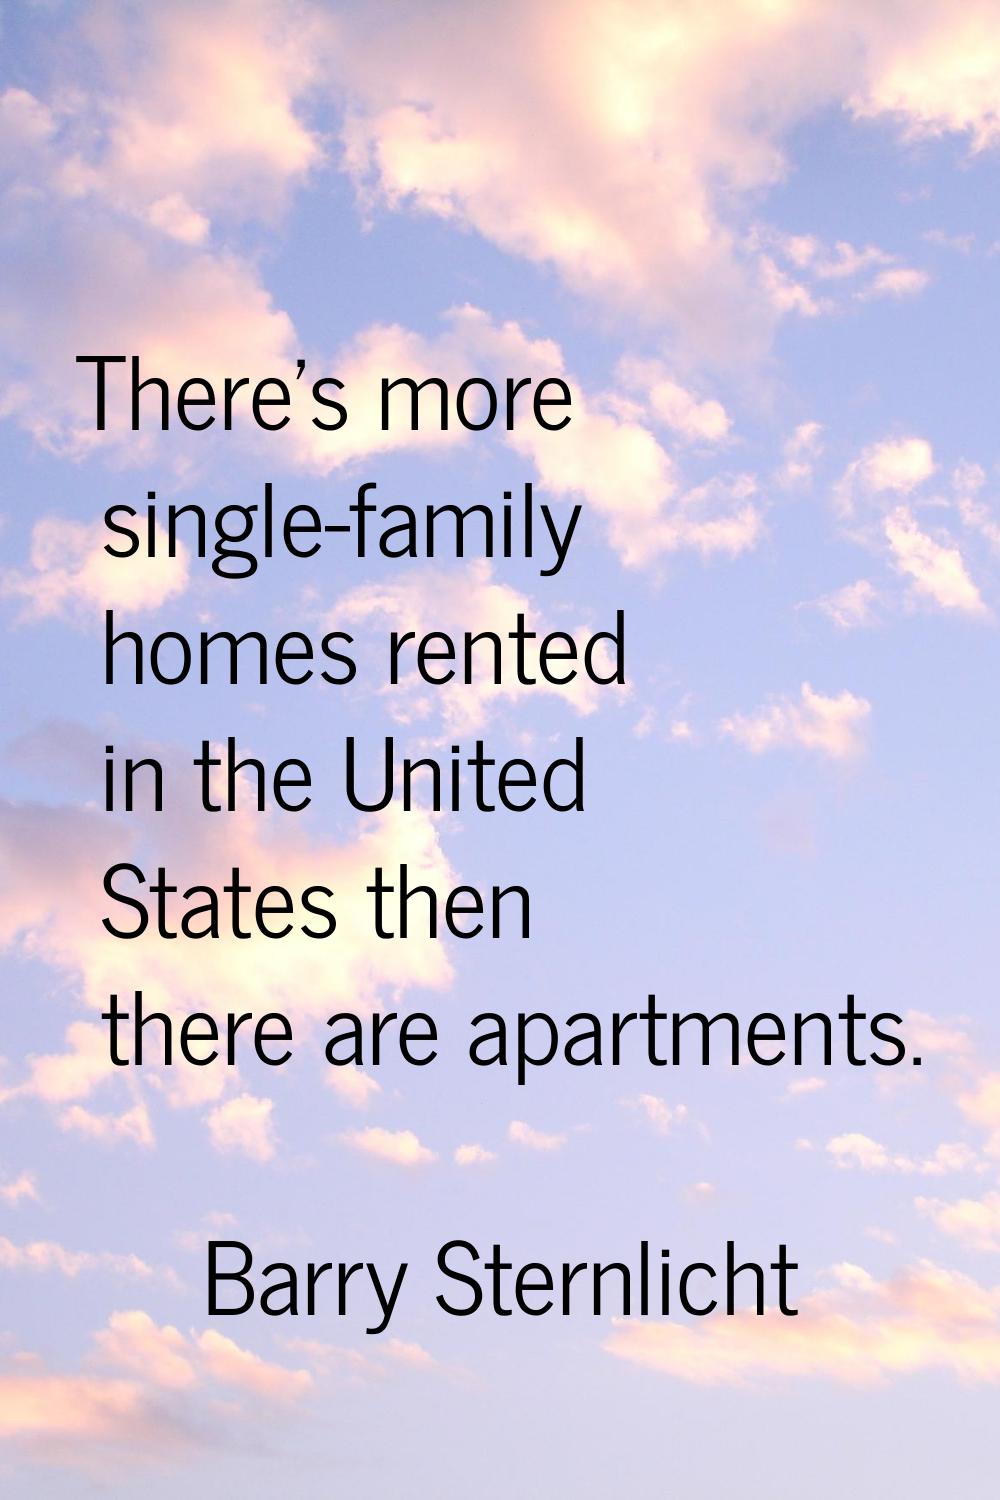 There's more single-family homes rented in the United States then there are apartments.